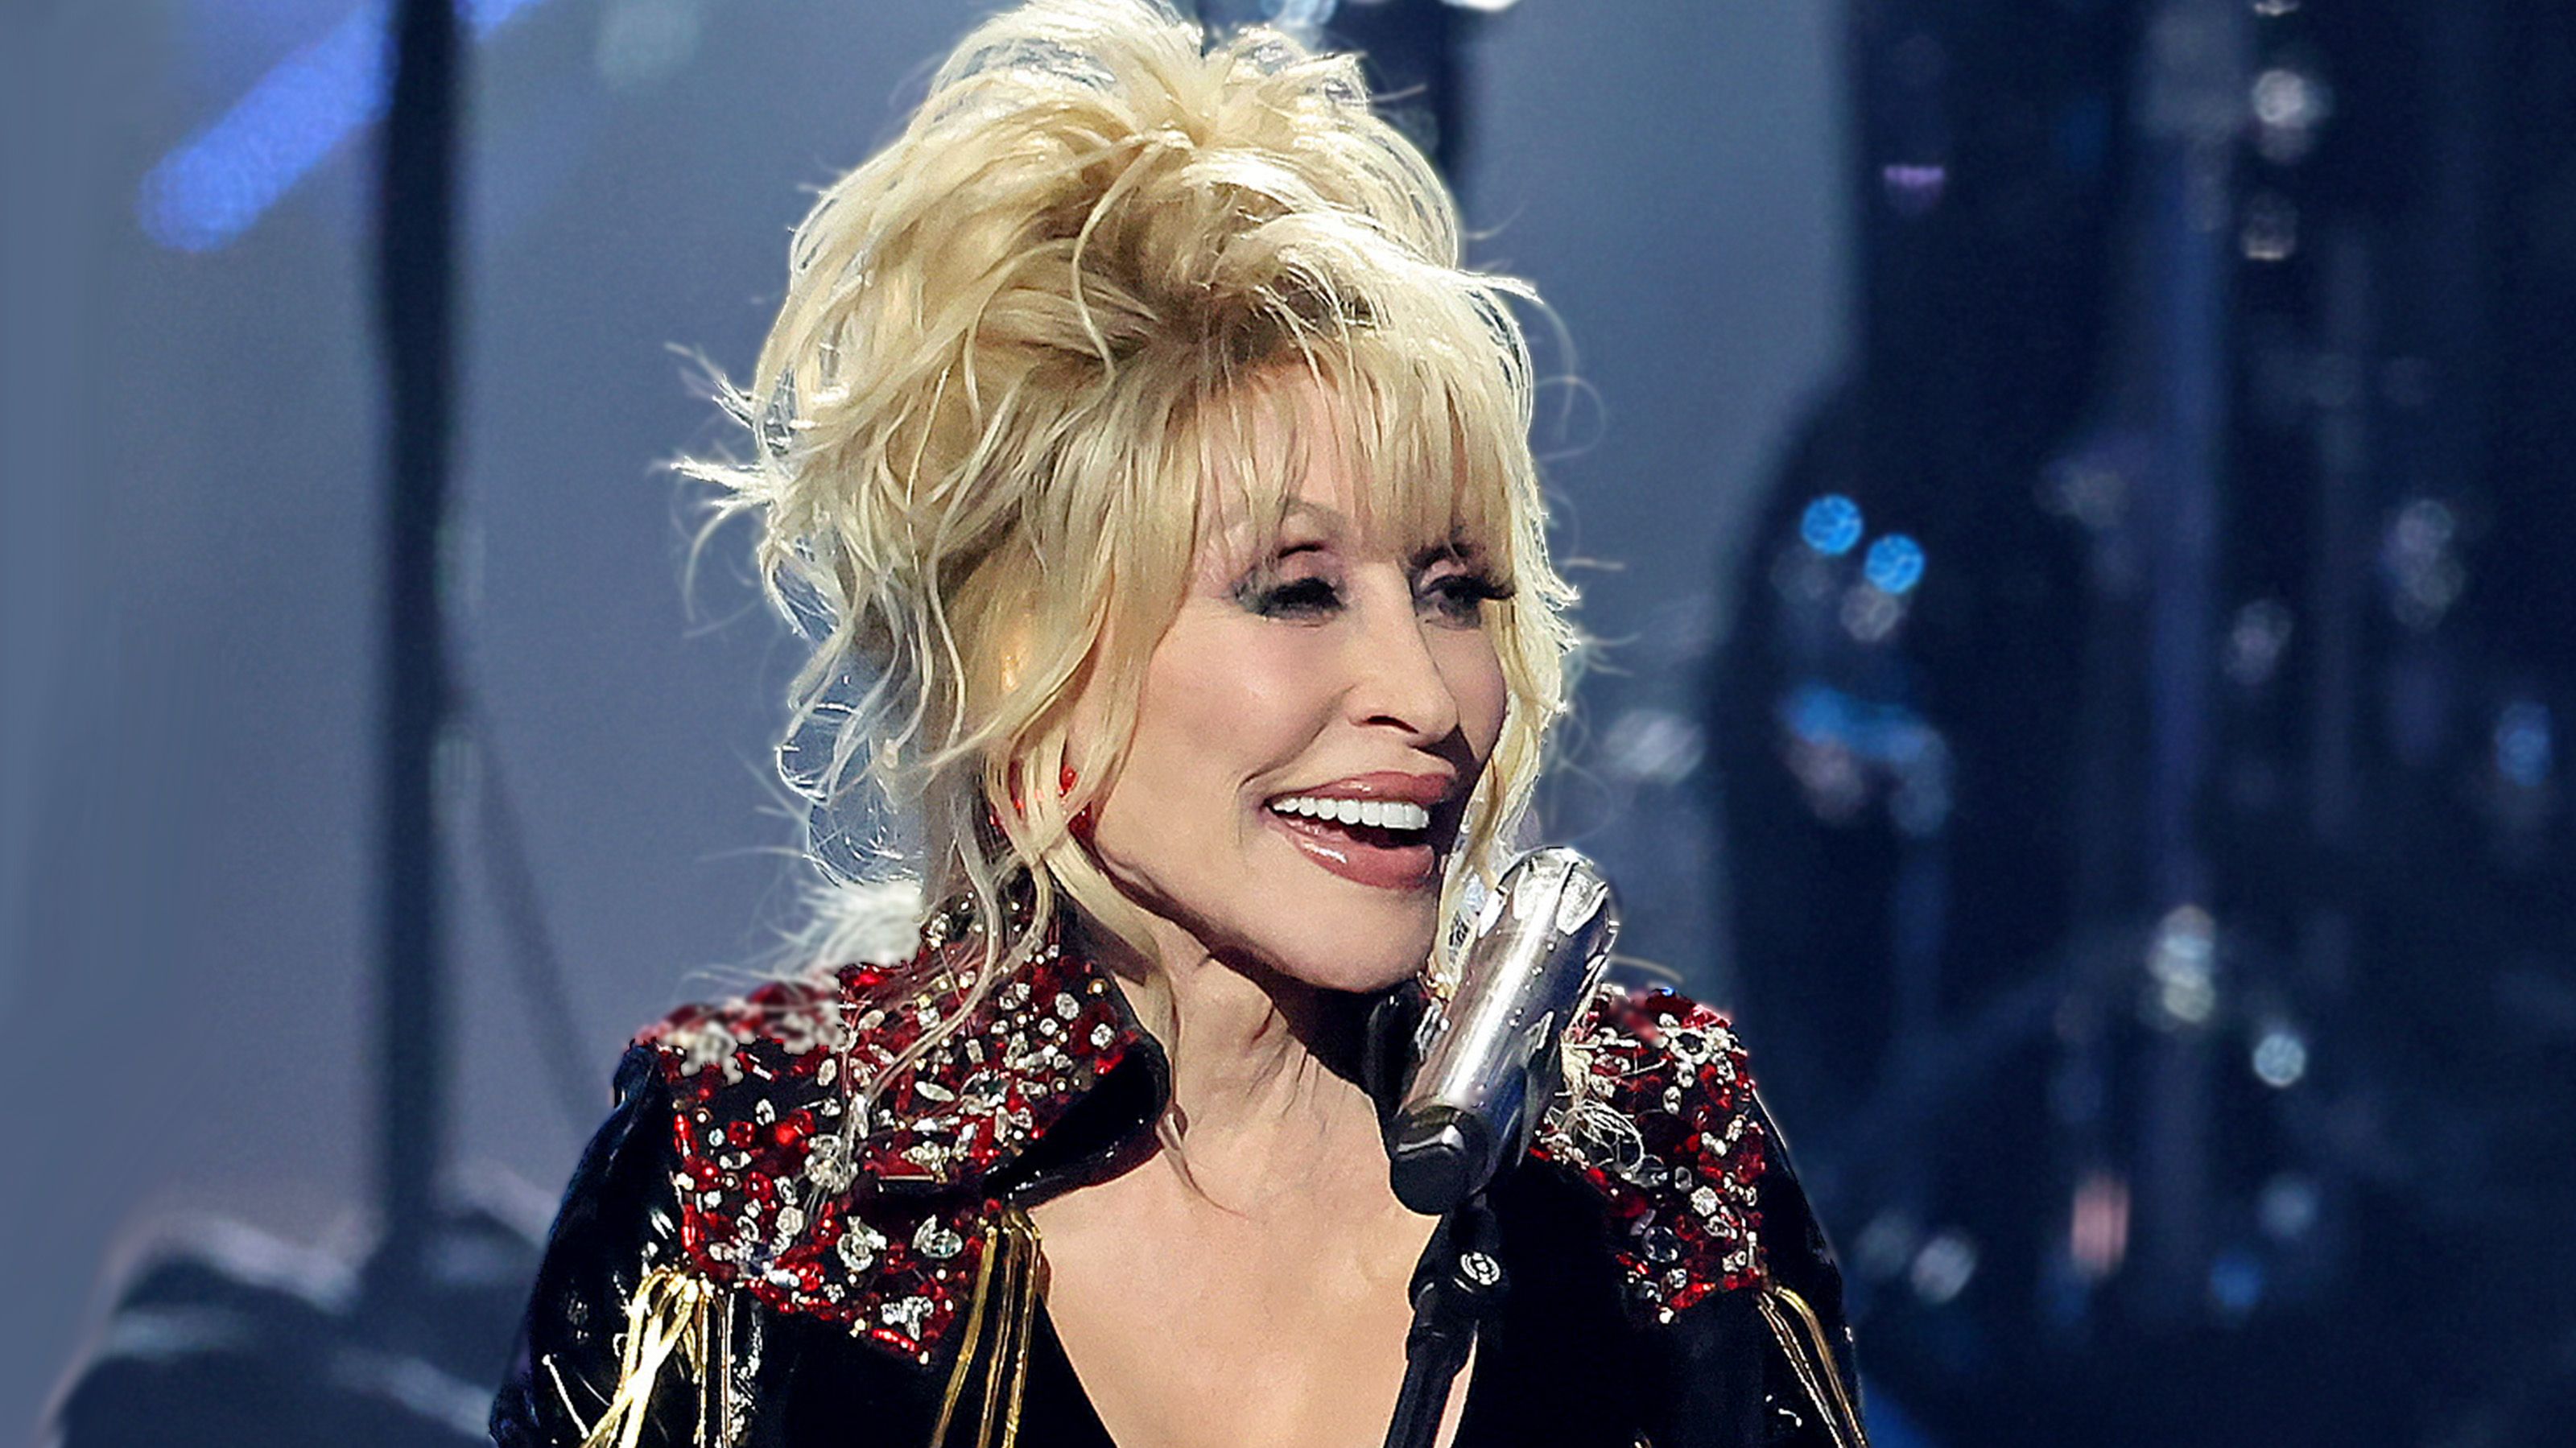 Can Dolly Parton really rock? Our verdict on the country legend's